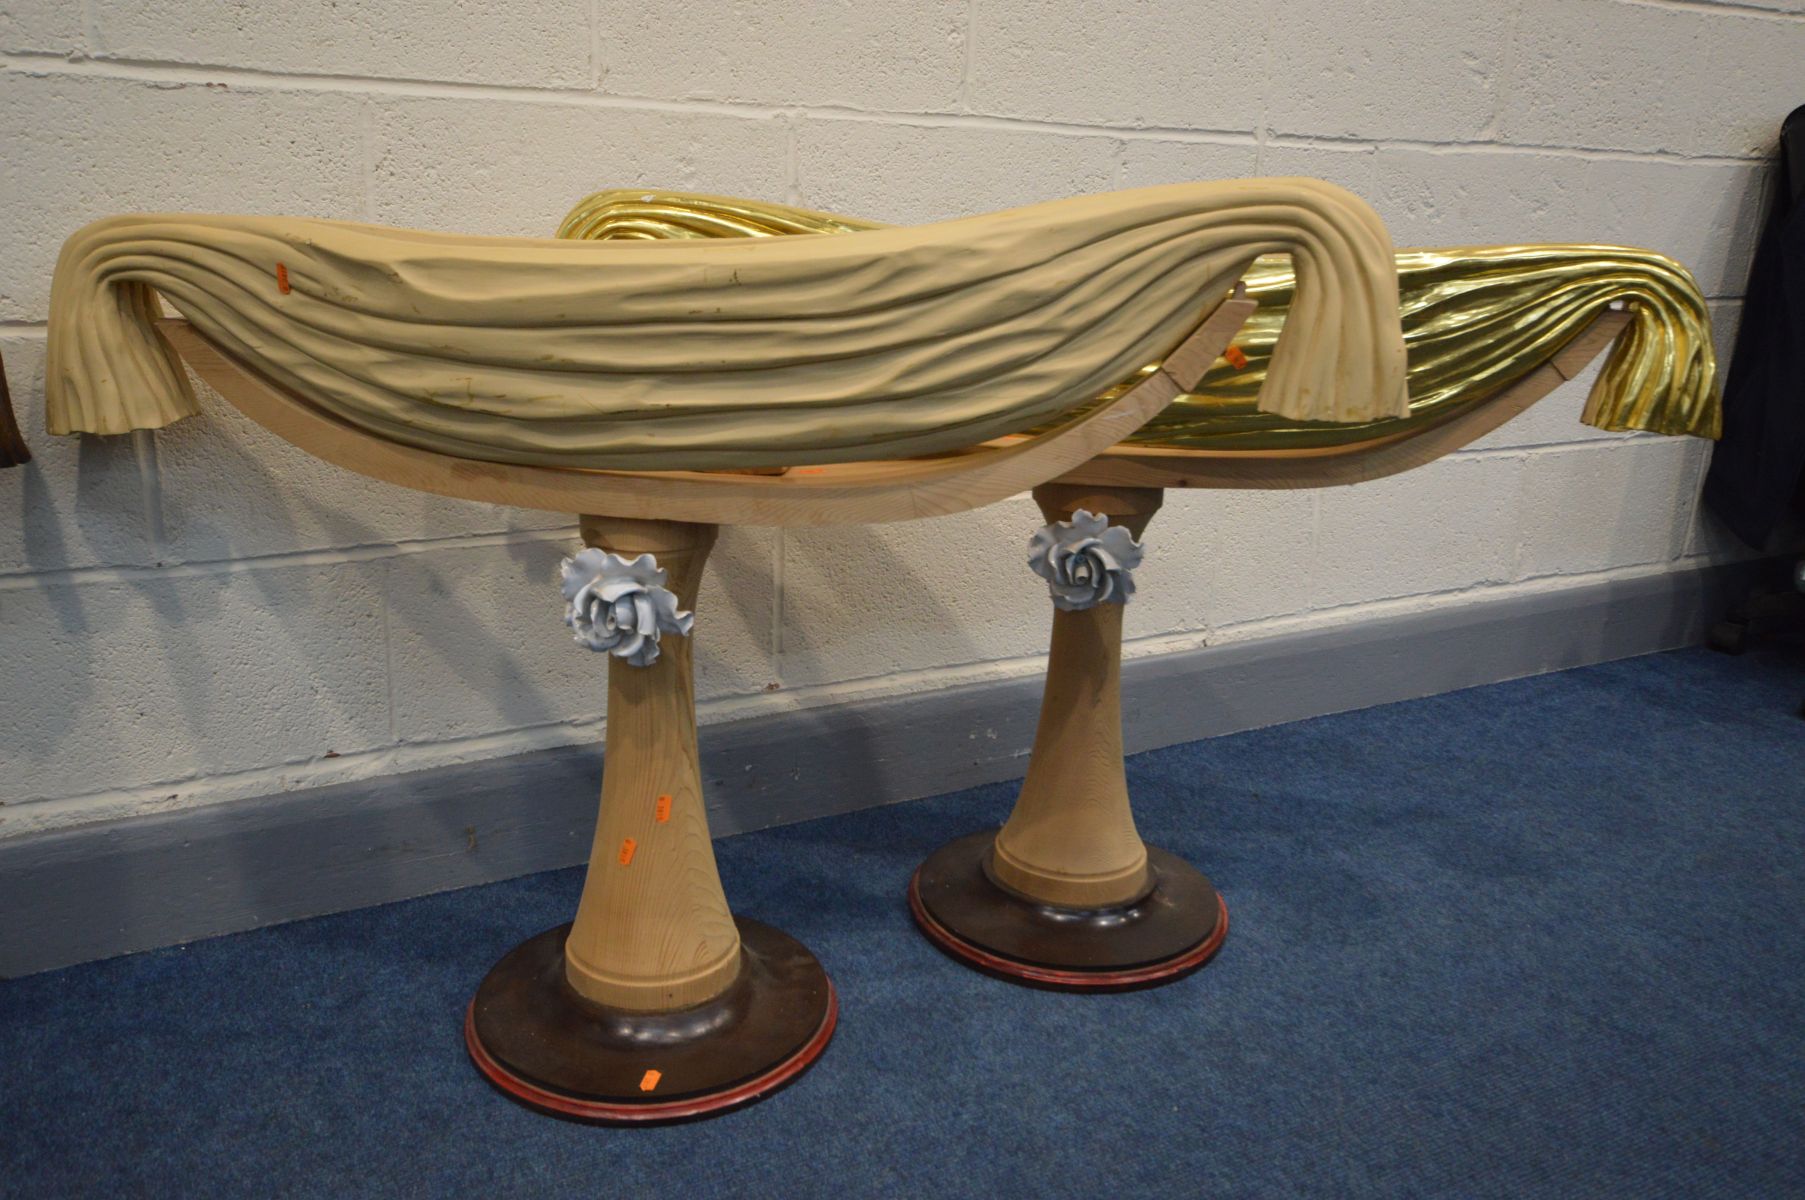 TWO PAIRS OF BESPOKE HAND CARVED PLANTERS, decorated as draped fabrics, on a cylindrical support, - Image 3 of 4